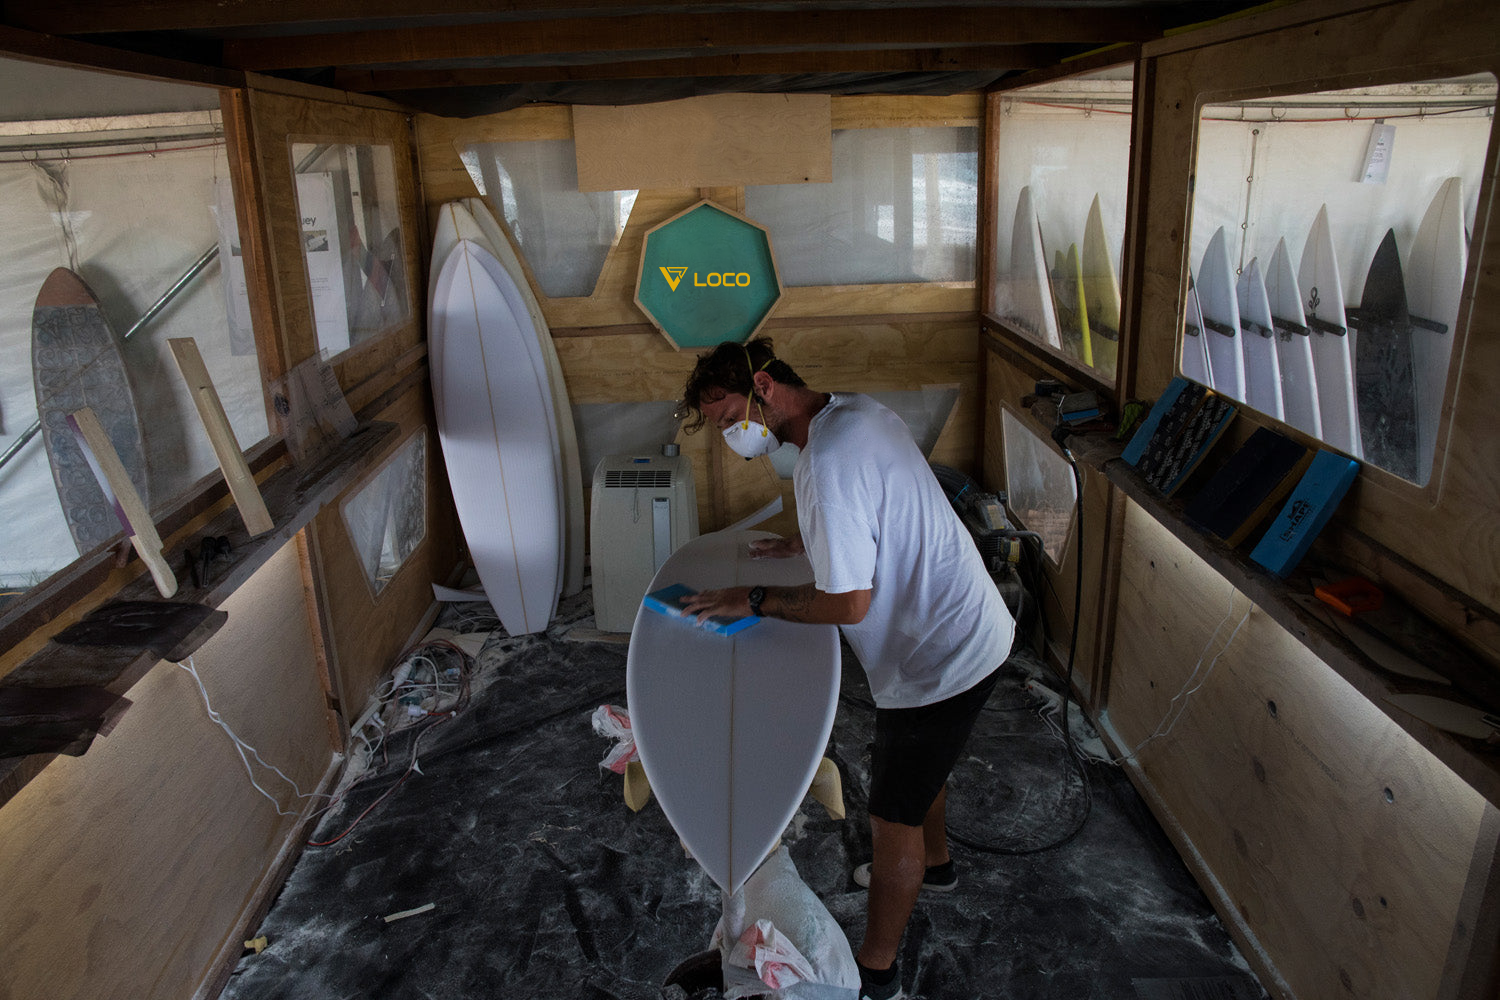 Loco's SUP Shaper At Work